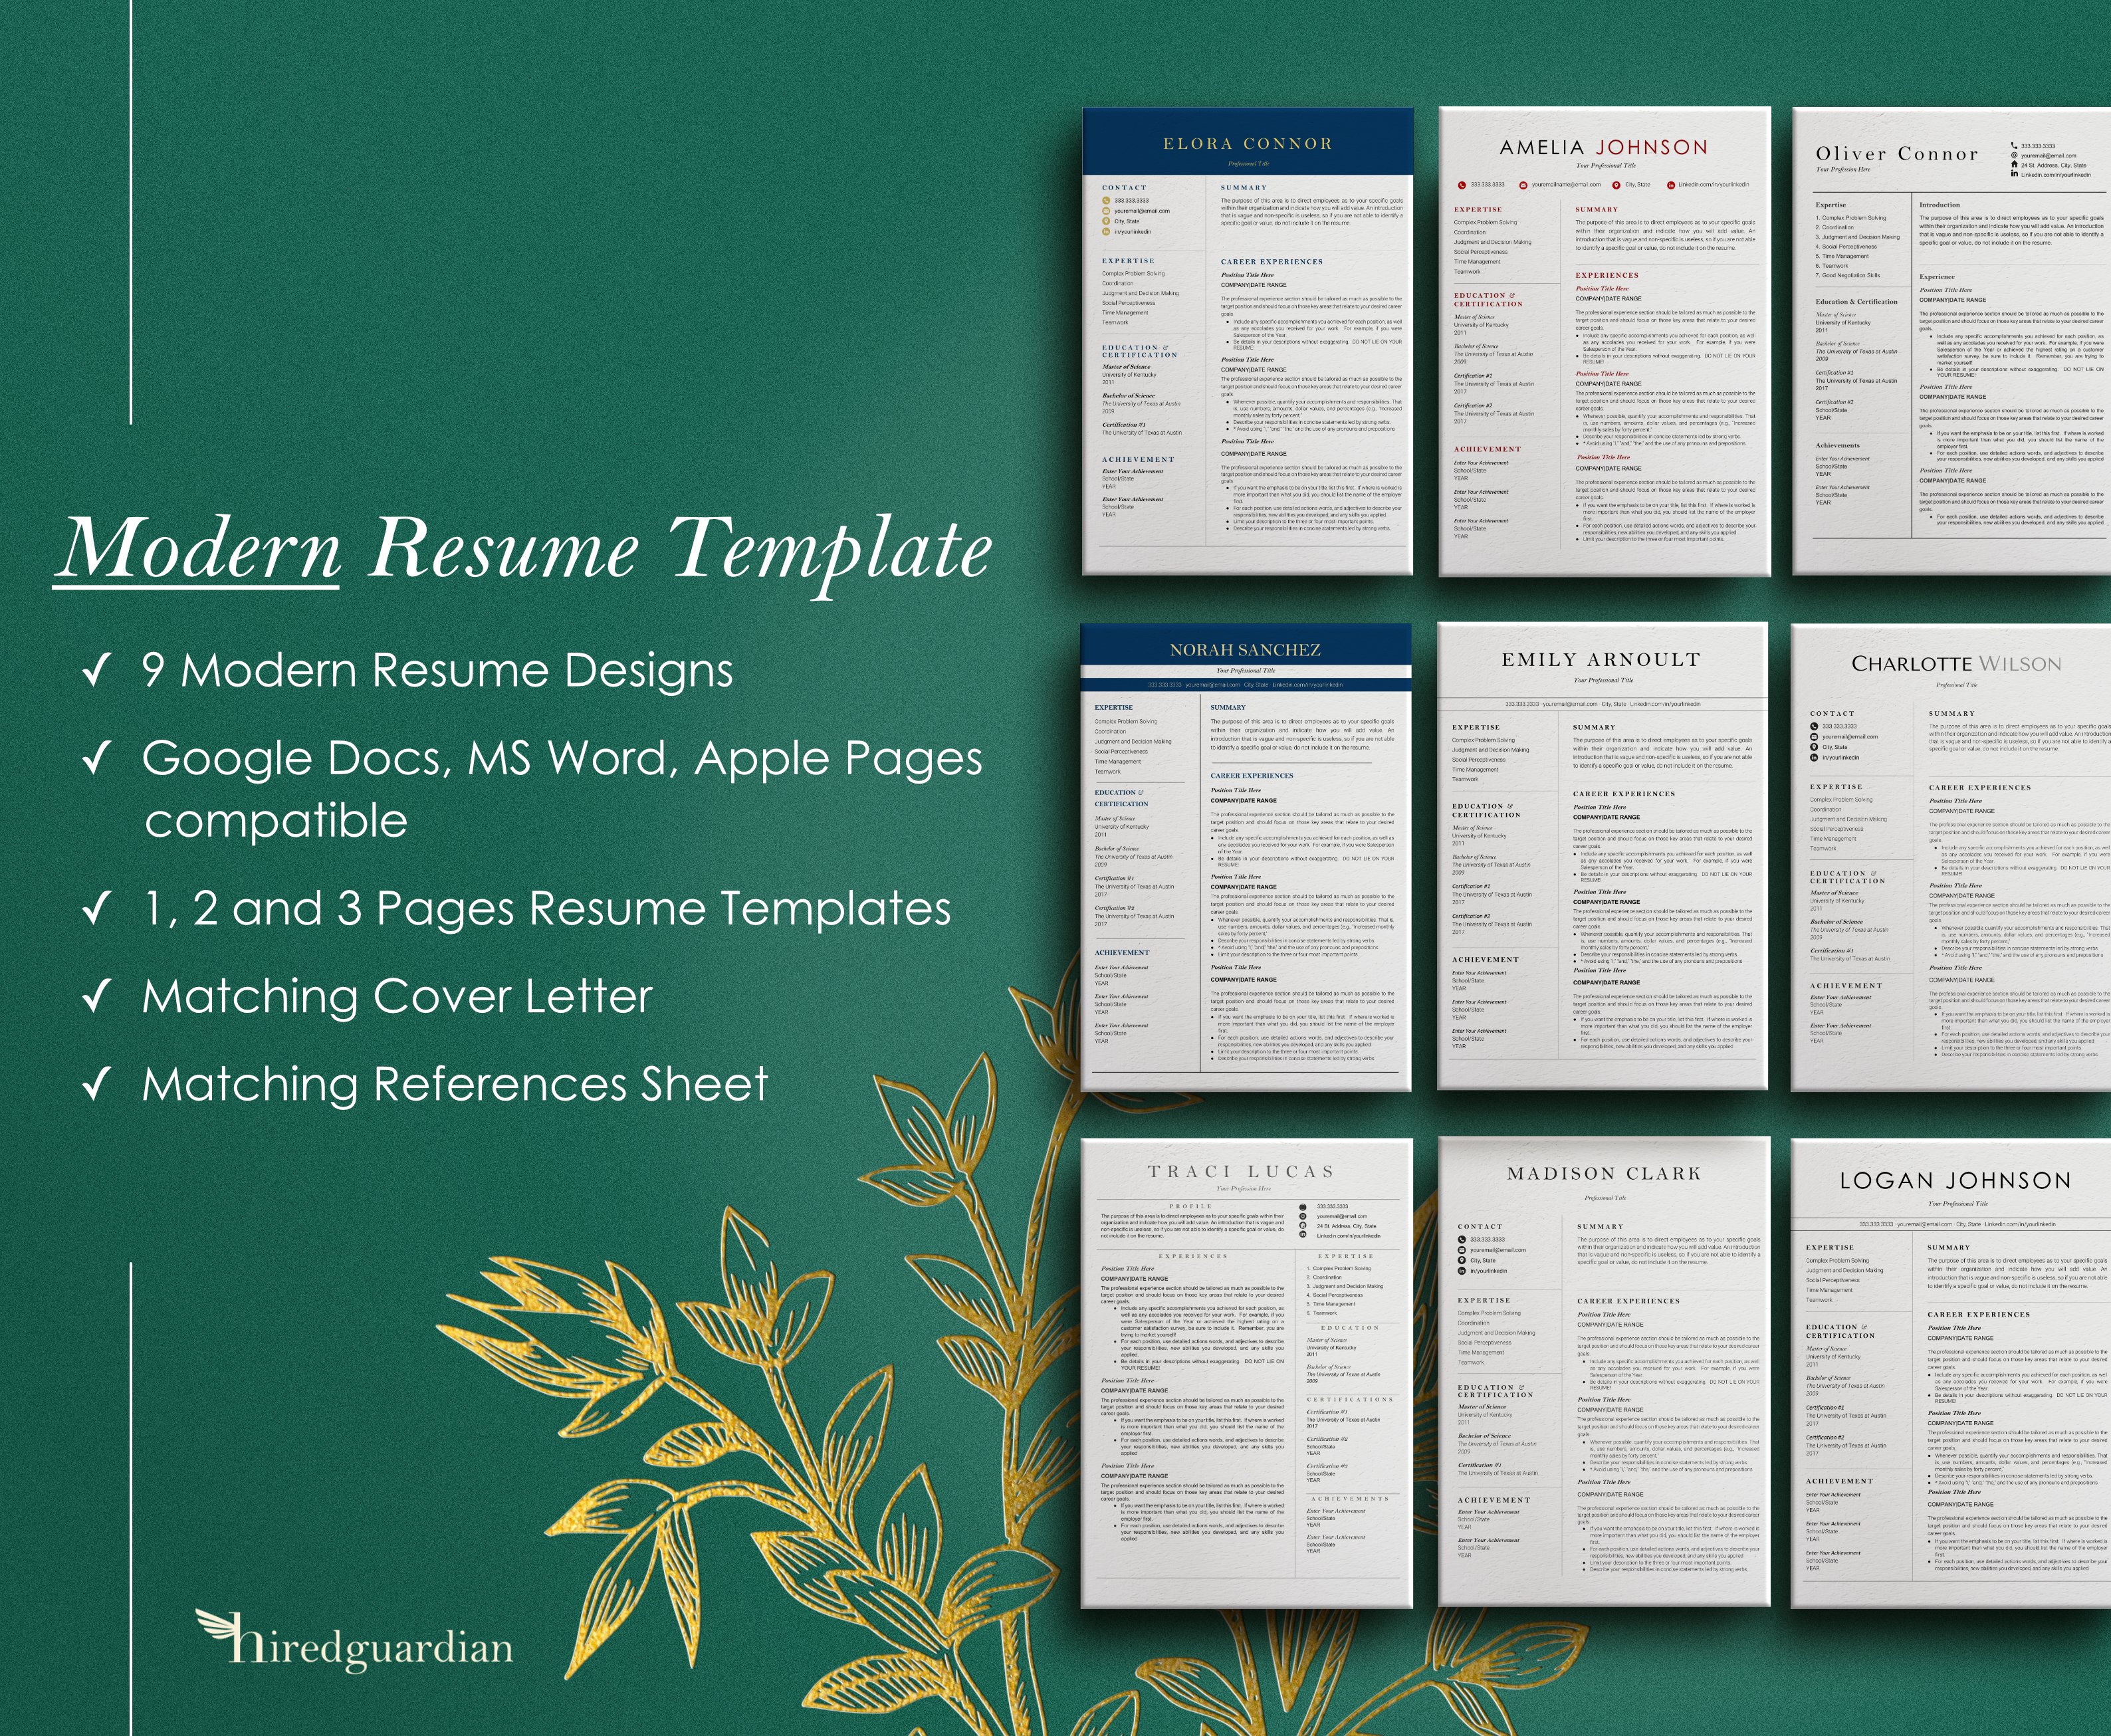 Set of six modern resume templates on a green background.